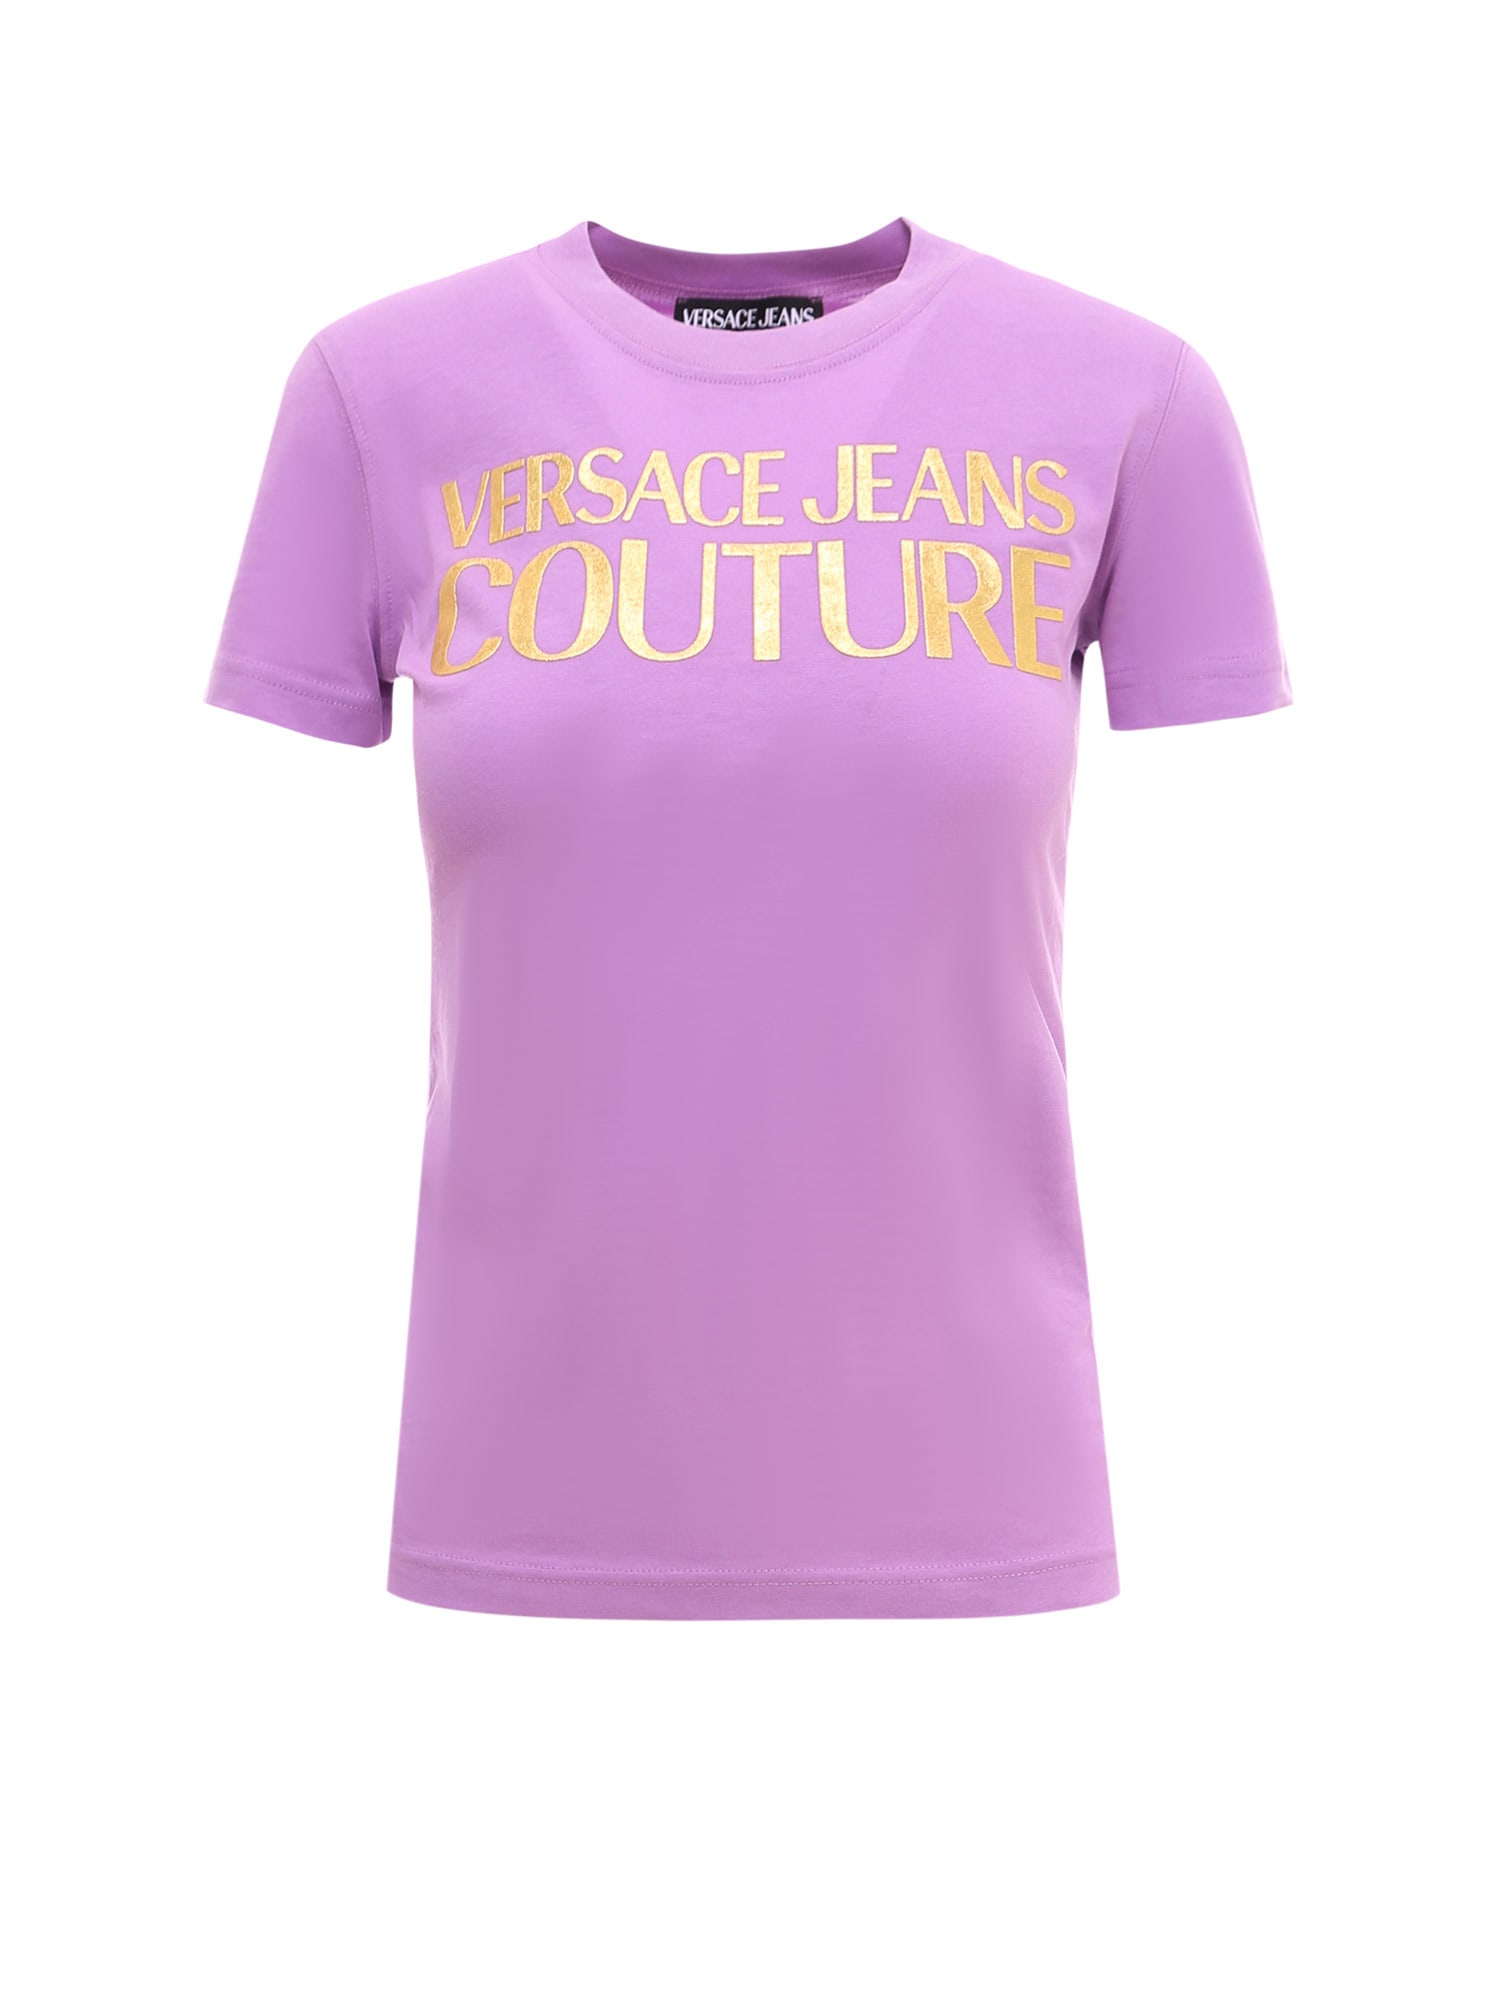 VERSACE JEANS COUTURE T-SHIRT,11943459